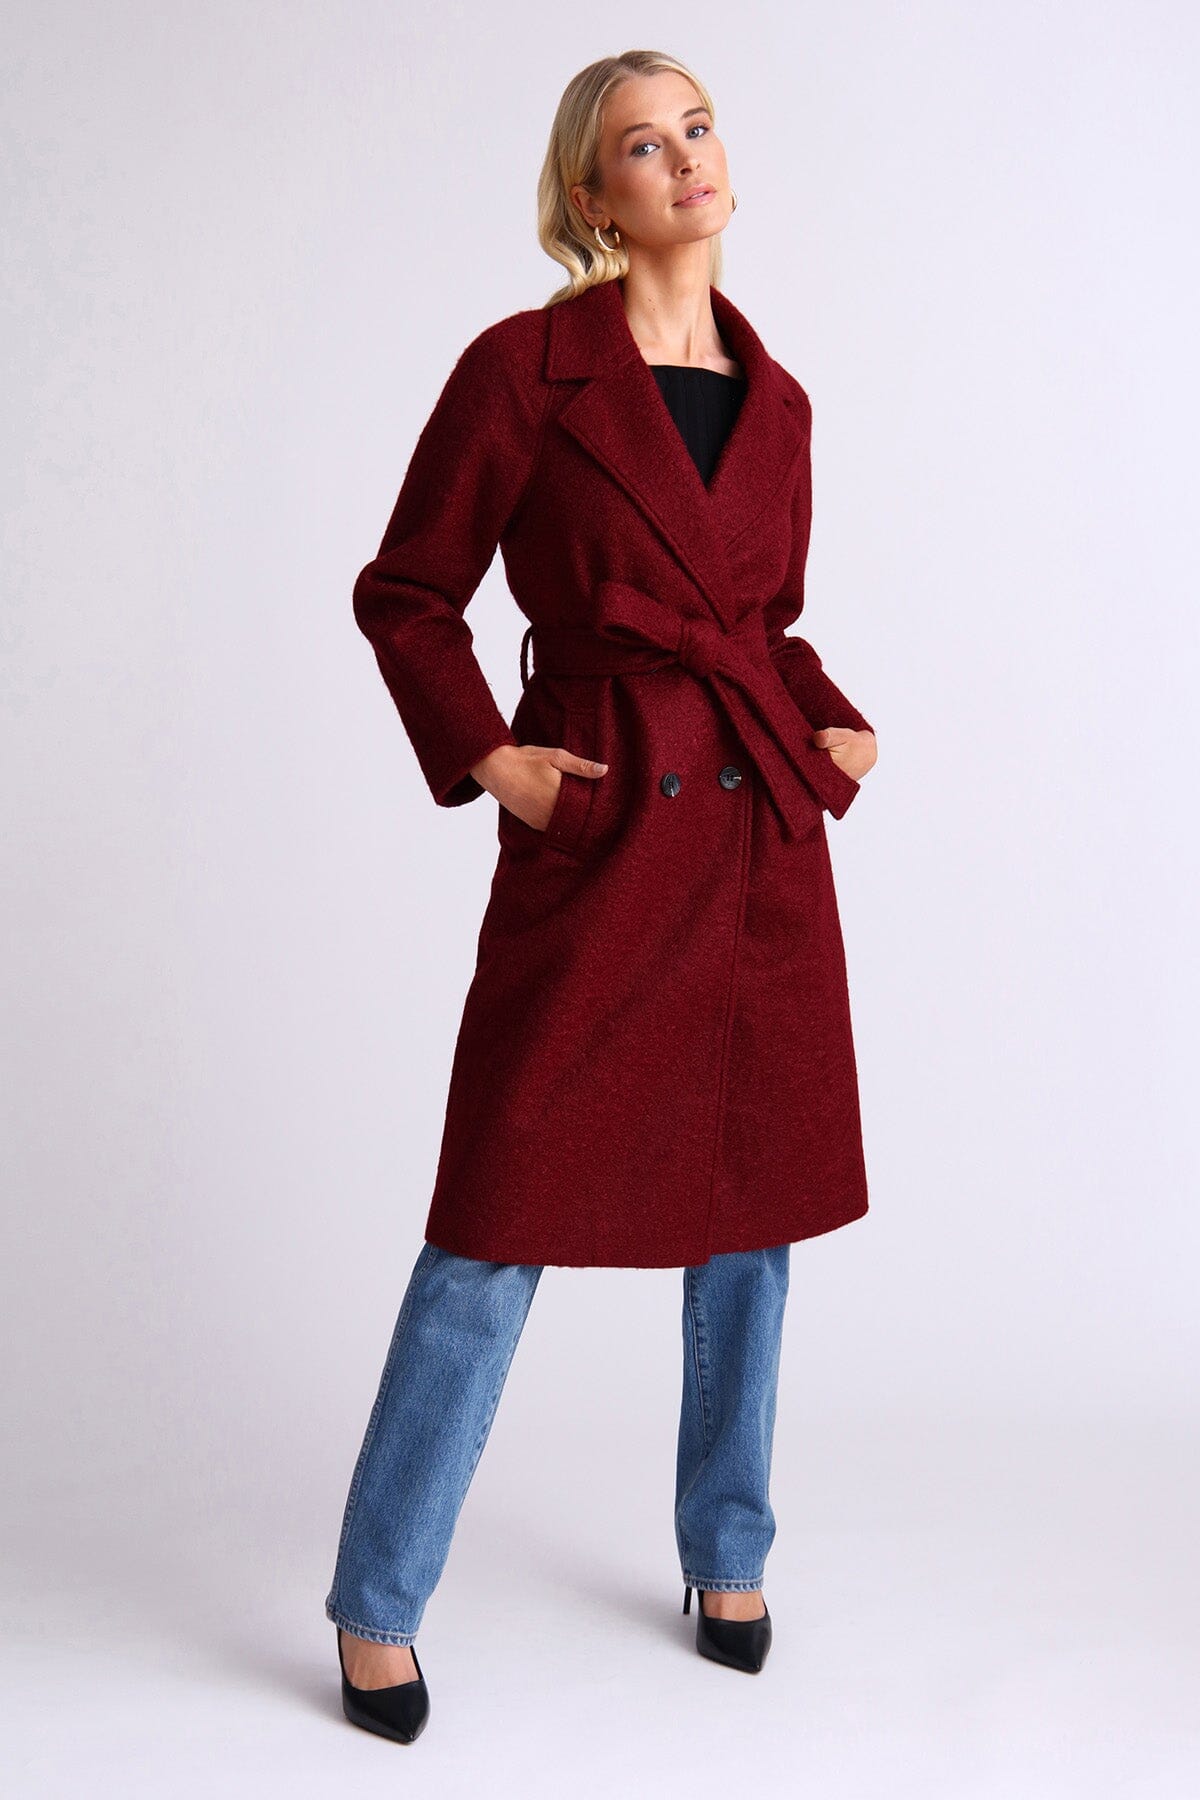 Dark red textured belted walker coat jacket - figure flattering day to night fall coats jackets for women